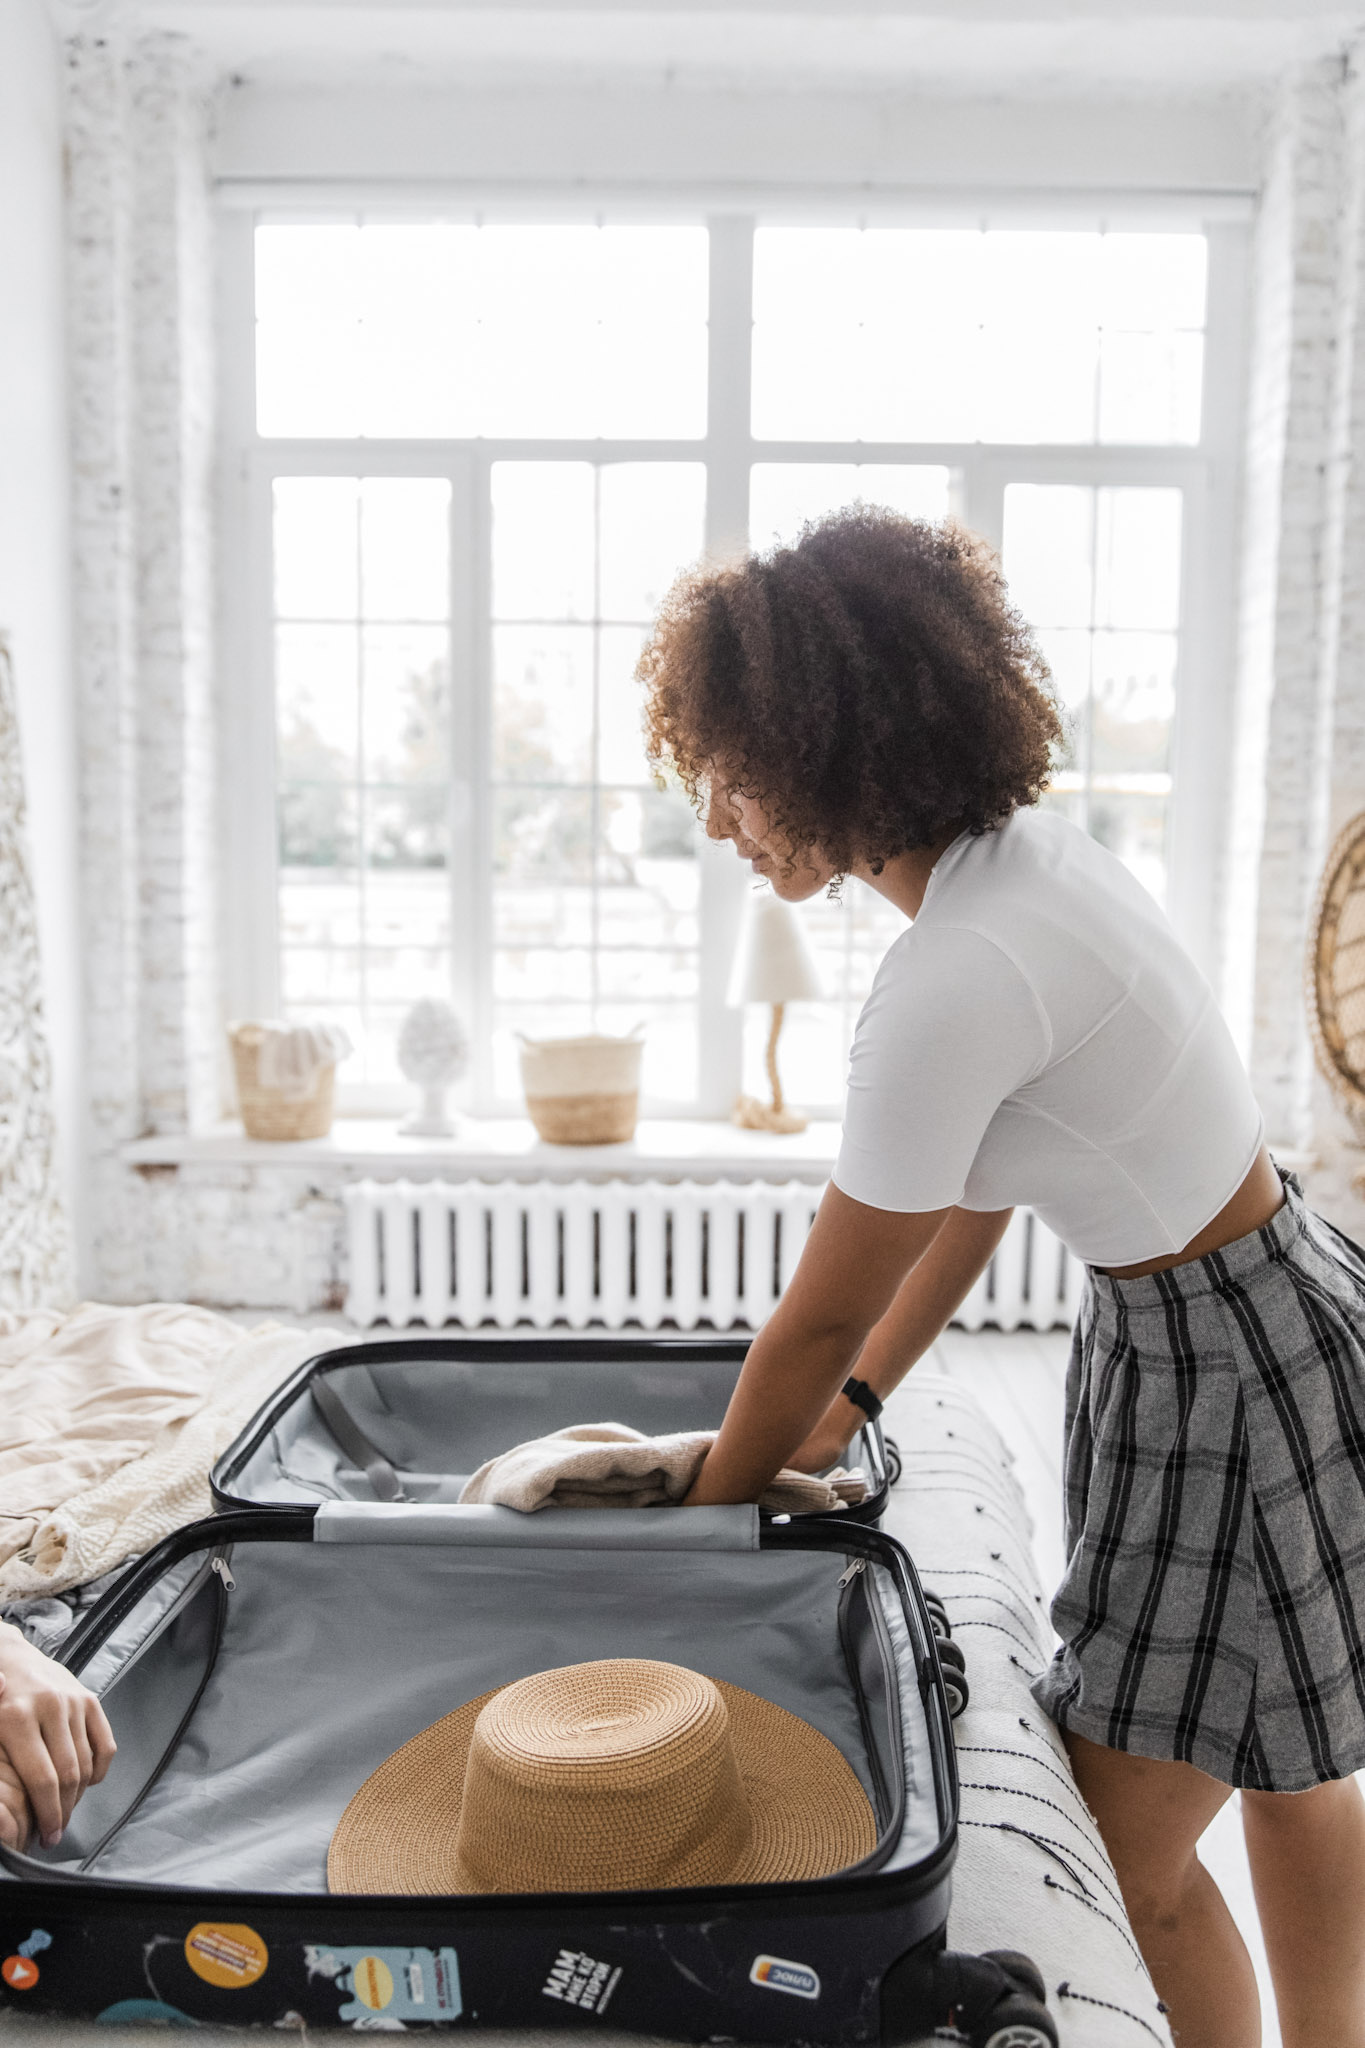 5 Easy Tips for Extending Luggage Lifespan